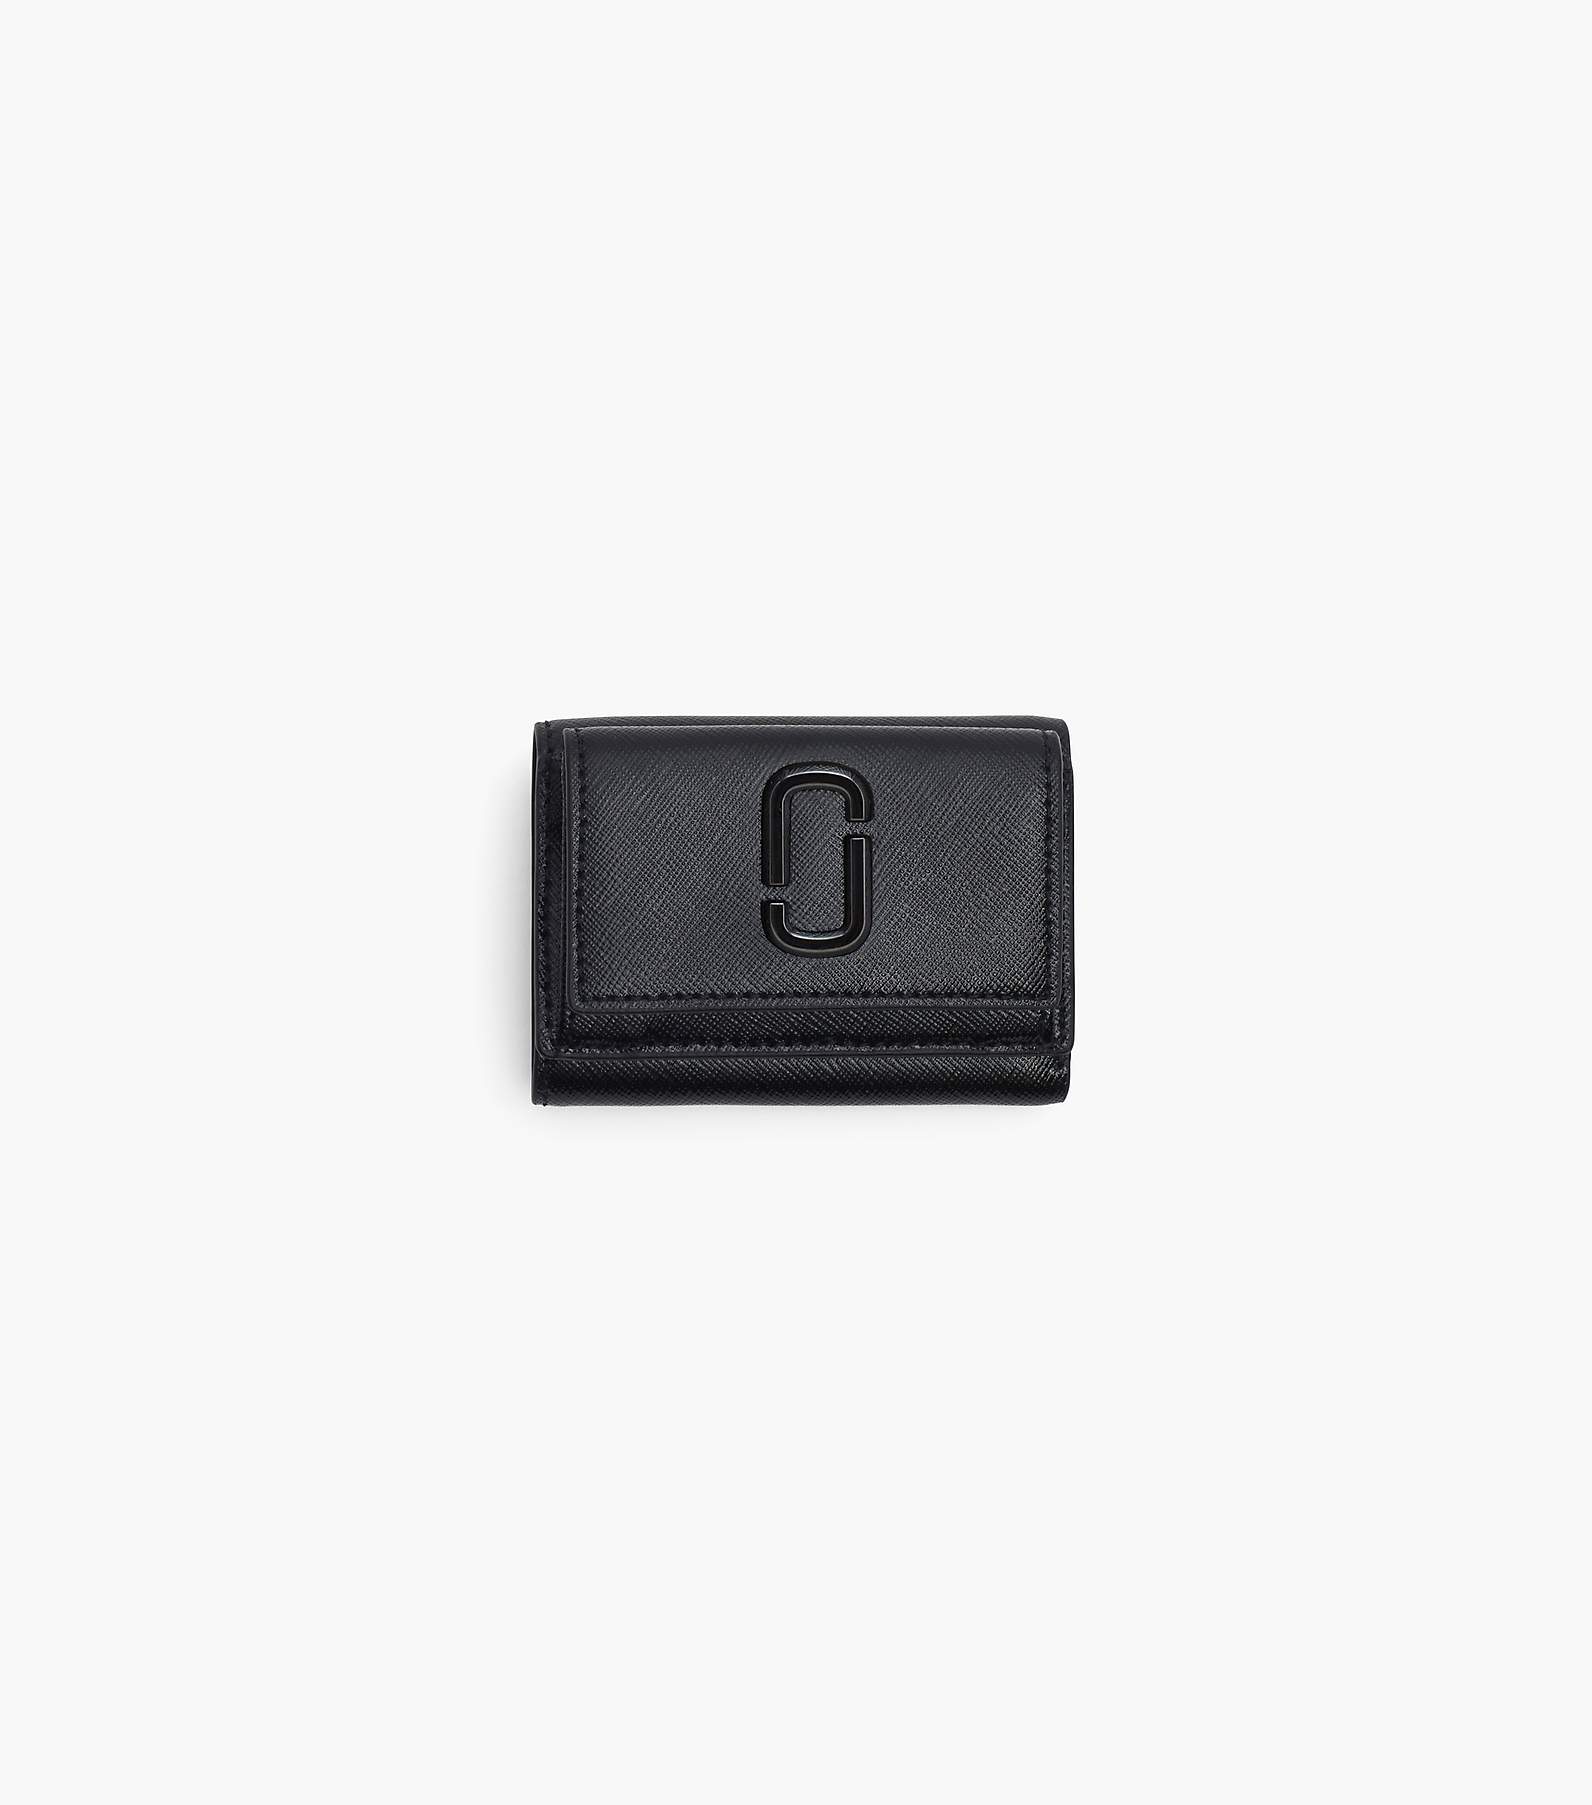 Women's The Utility Snapshot Mini Compact Wallet by Marc Jacobs